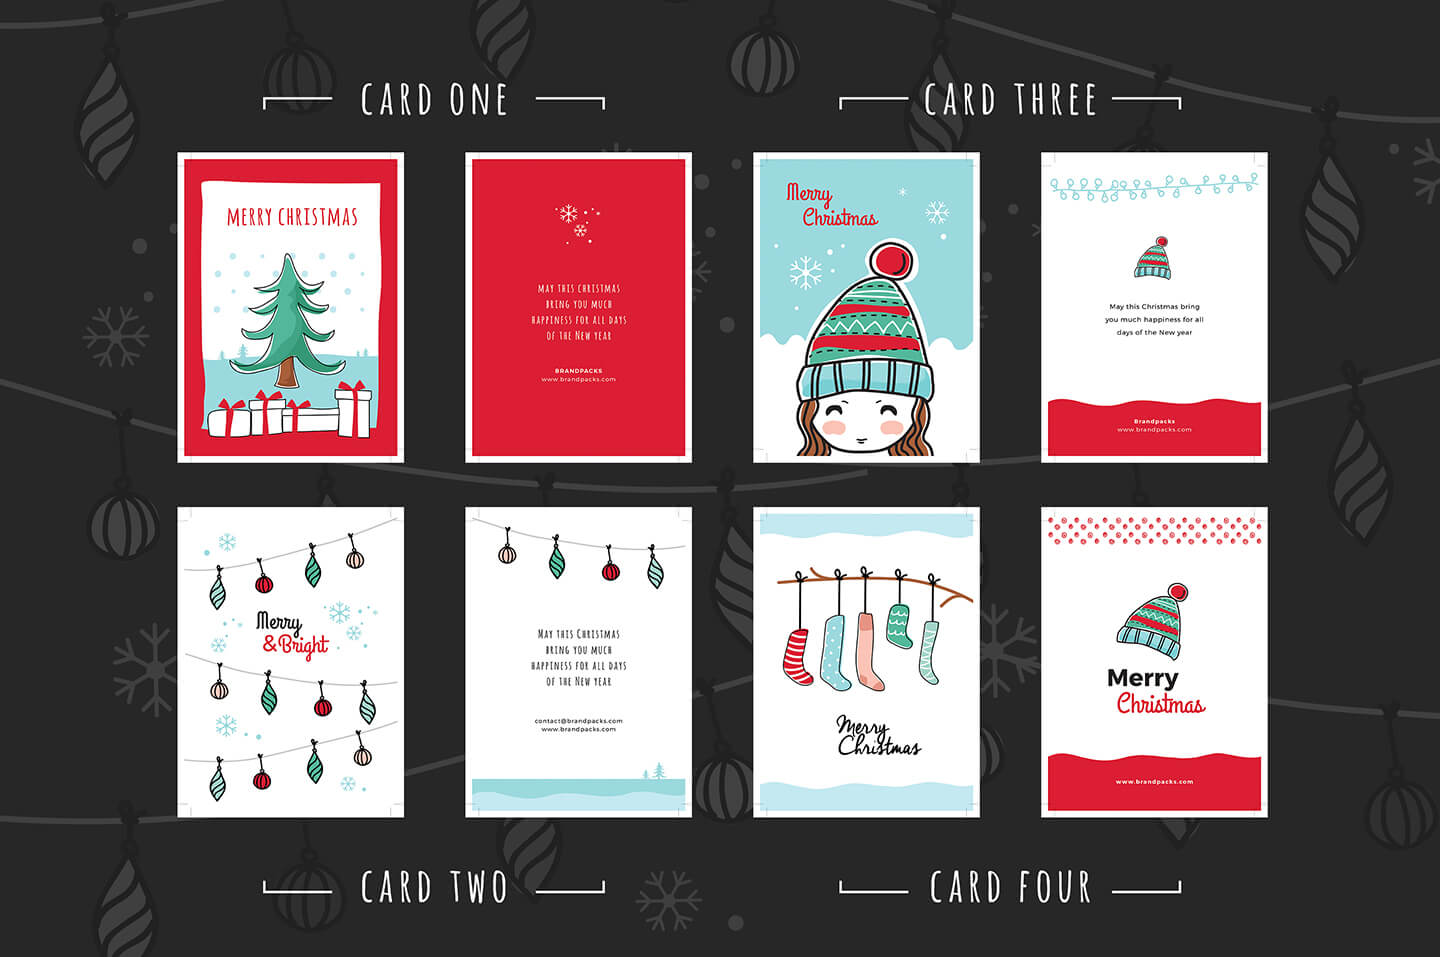 005 Template Ideas Free Christmas Greeting Card Templates Intended For Free Christmas Card Templates For Photoshop